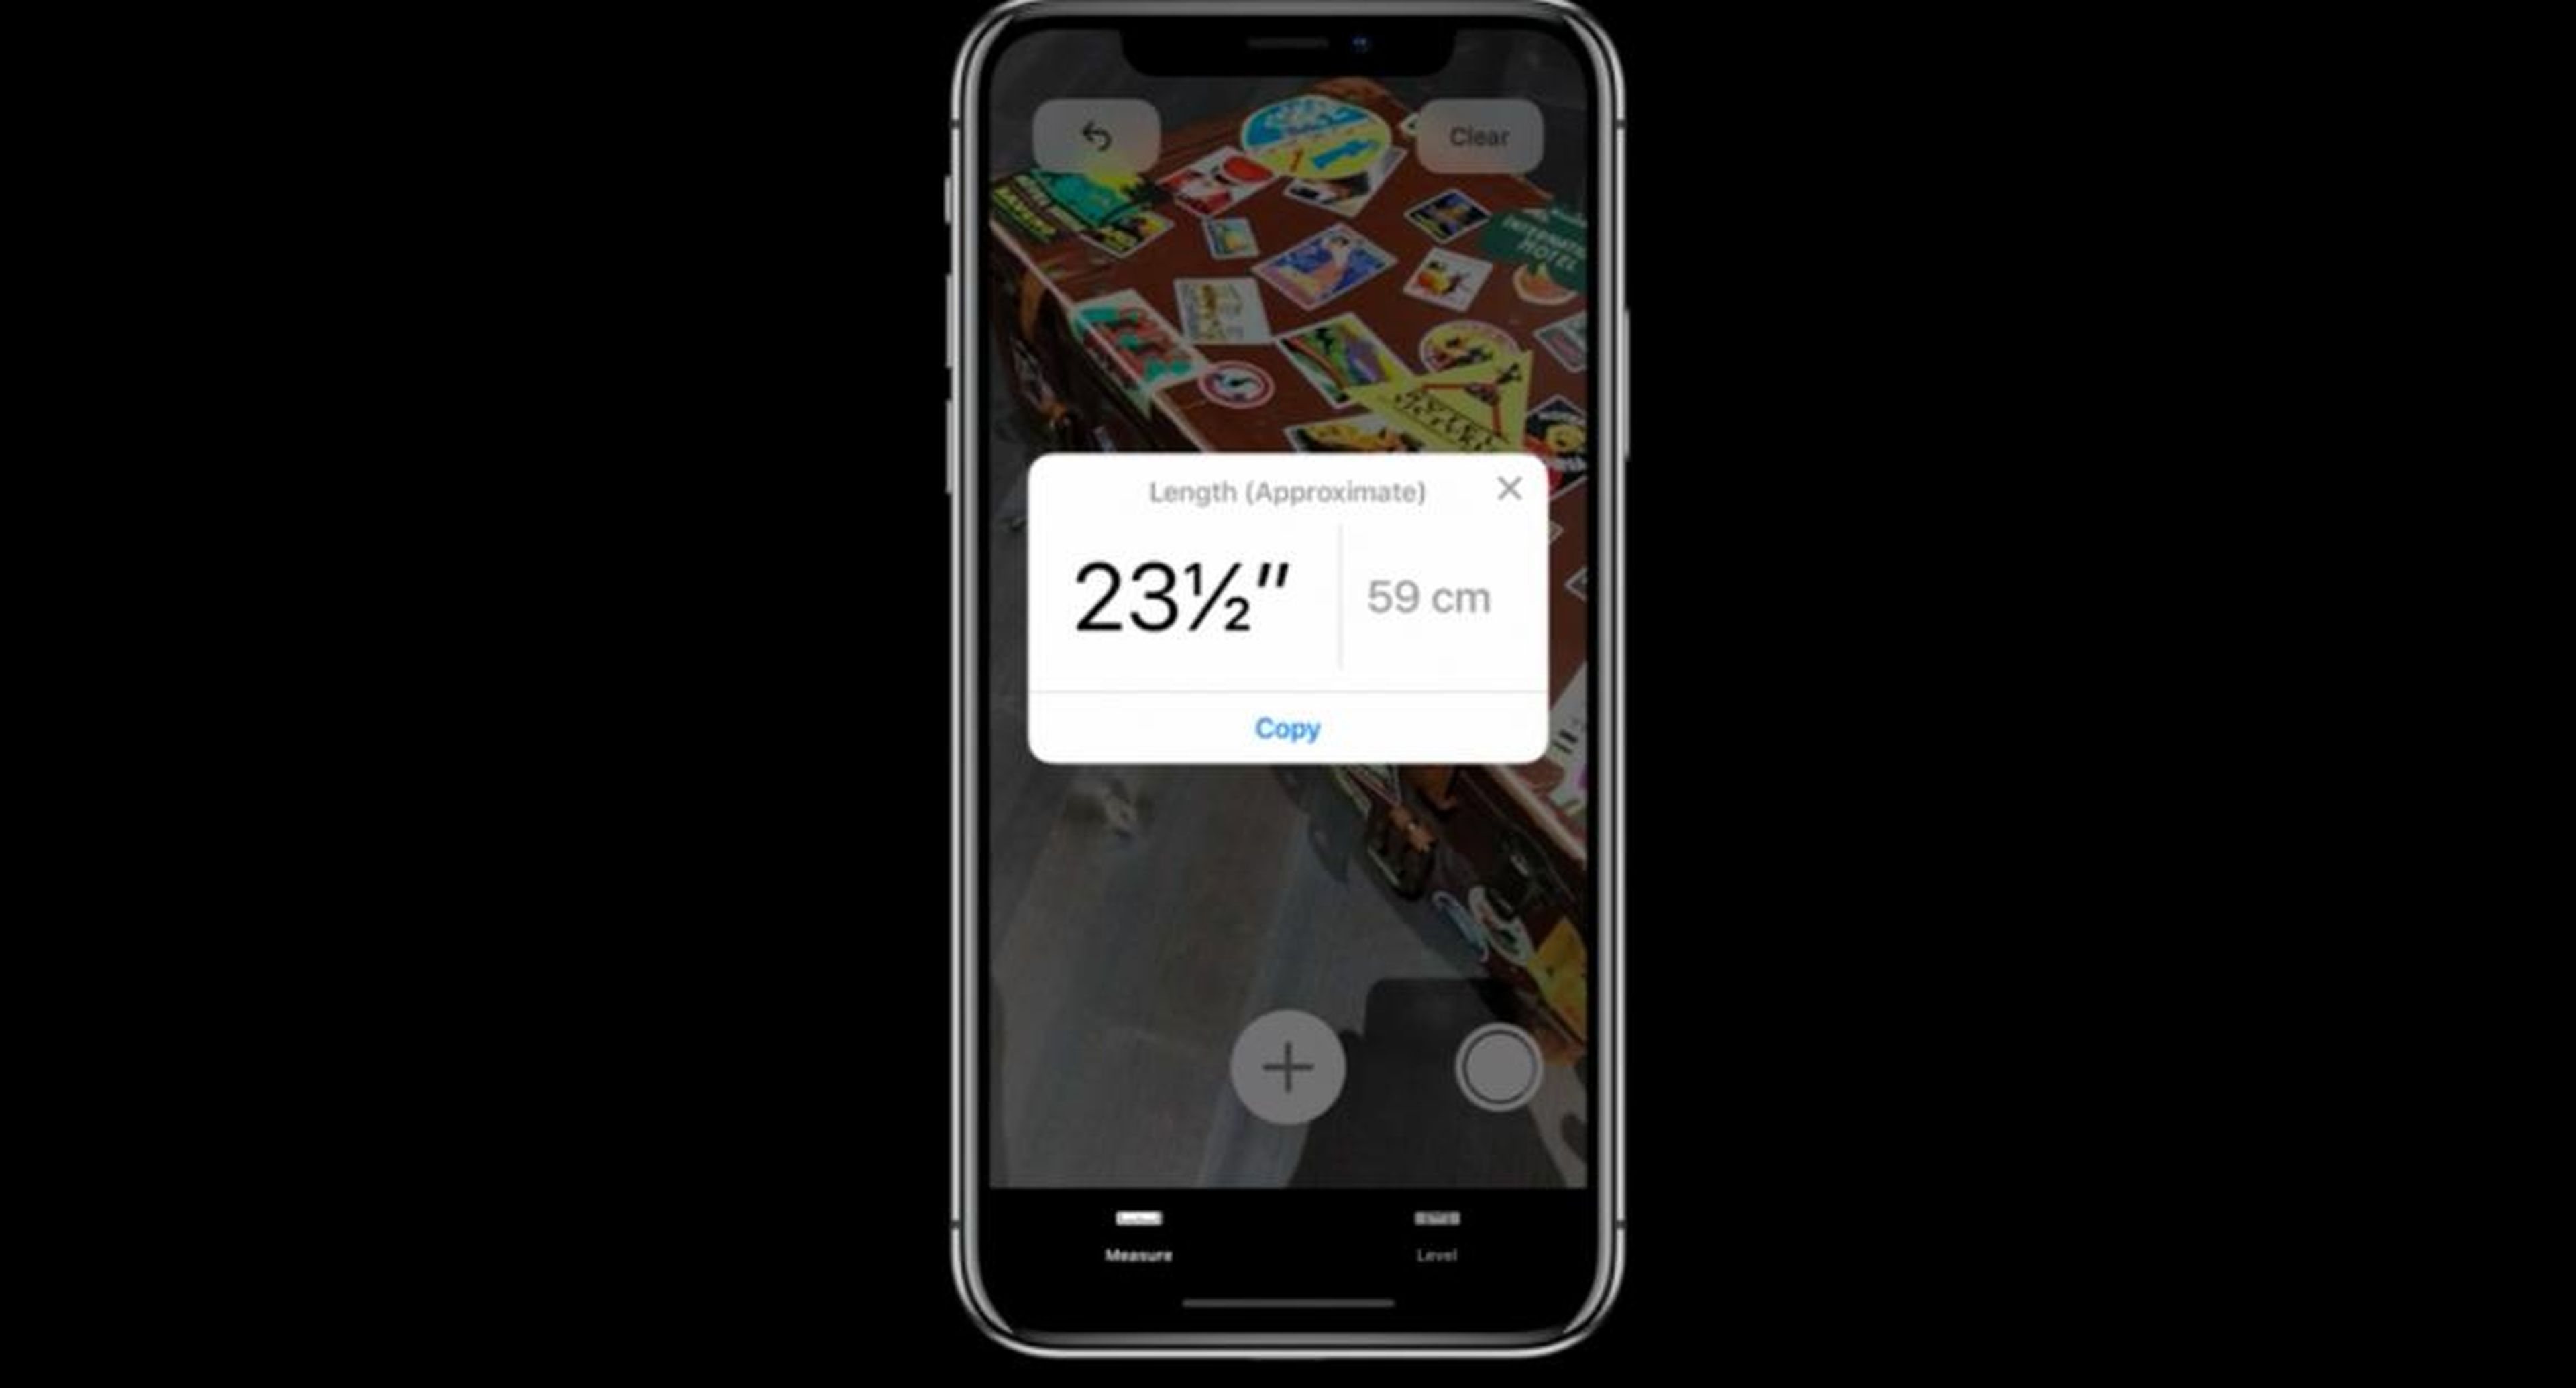 5. A new iOS 12 app called Measure lets you, yes, measure distance and length using augmented reality. Just point your phone's camera at what you want to measure, then tap and drag a line with your finger to create a measurement.